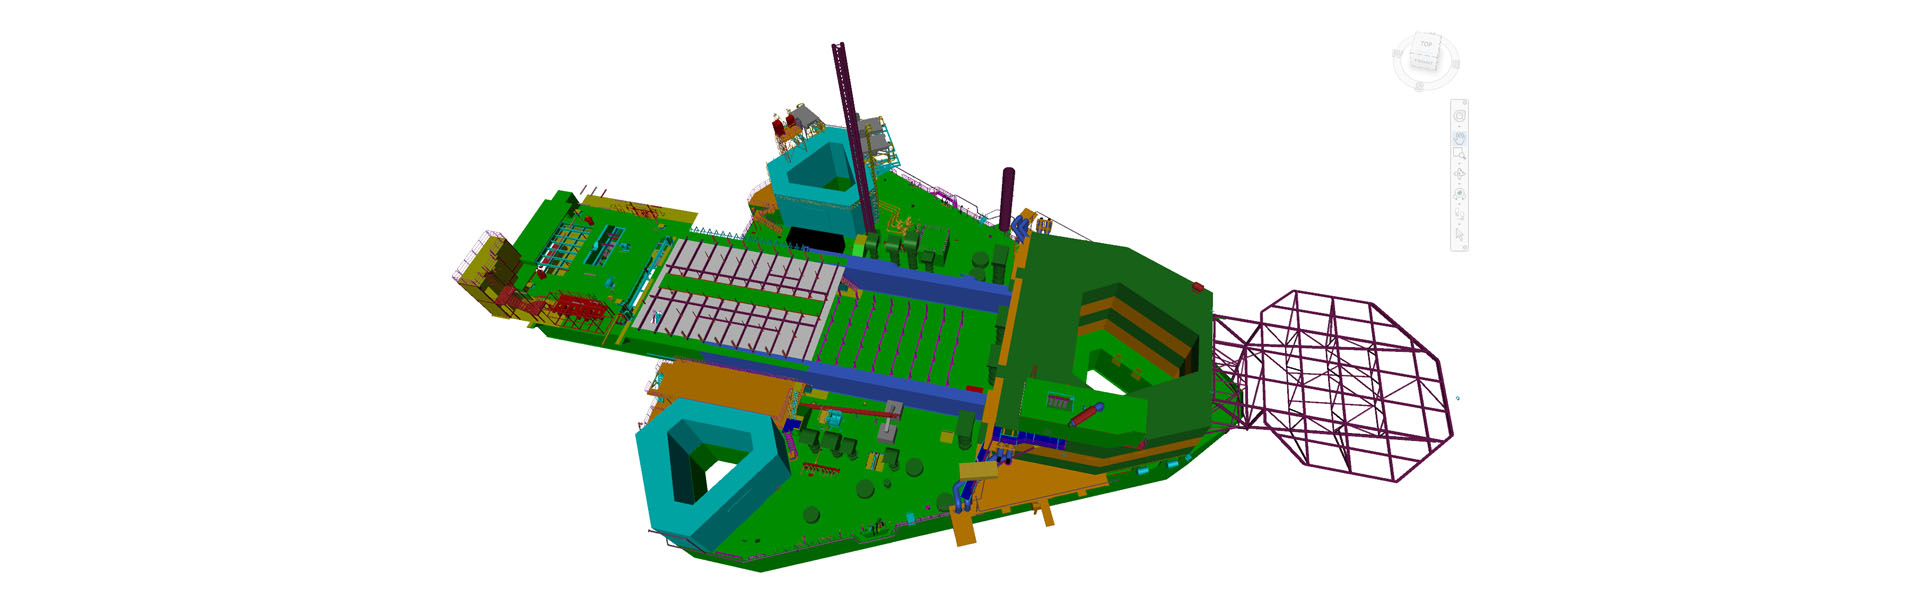 Plan view of a 3D model of an offshore structure designed at Conceptia.